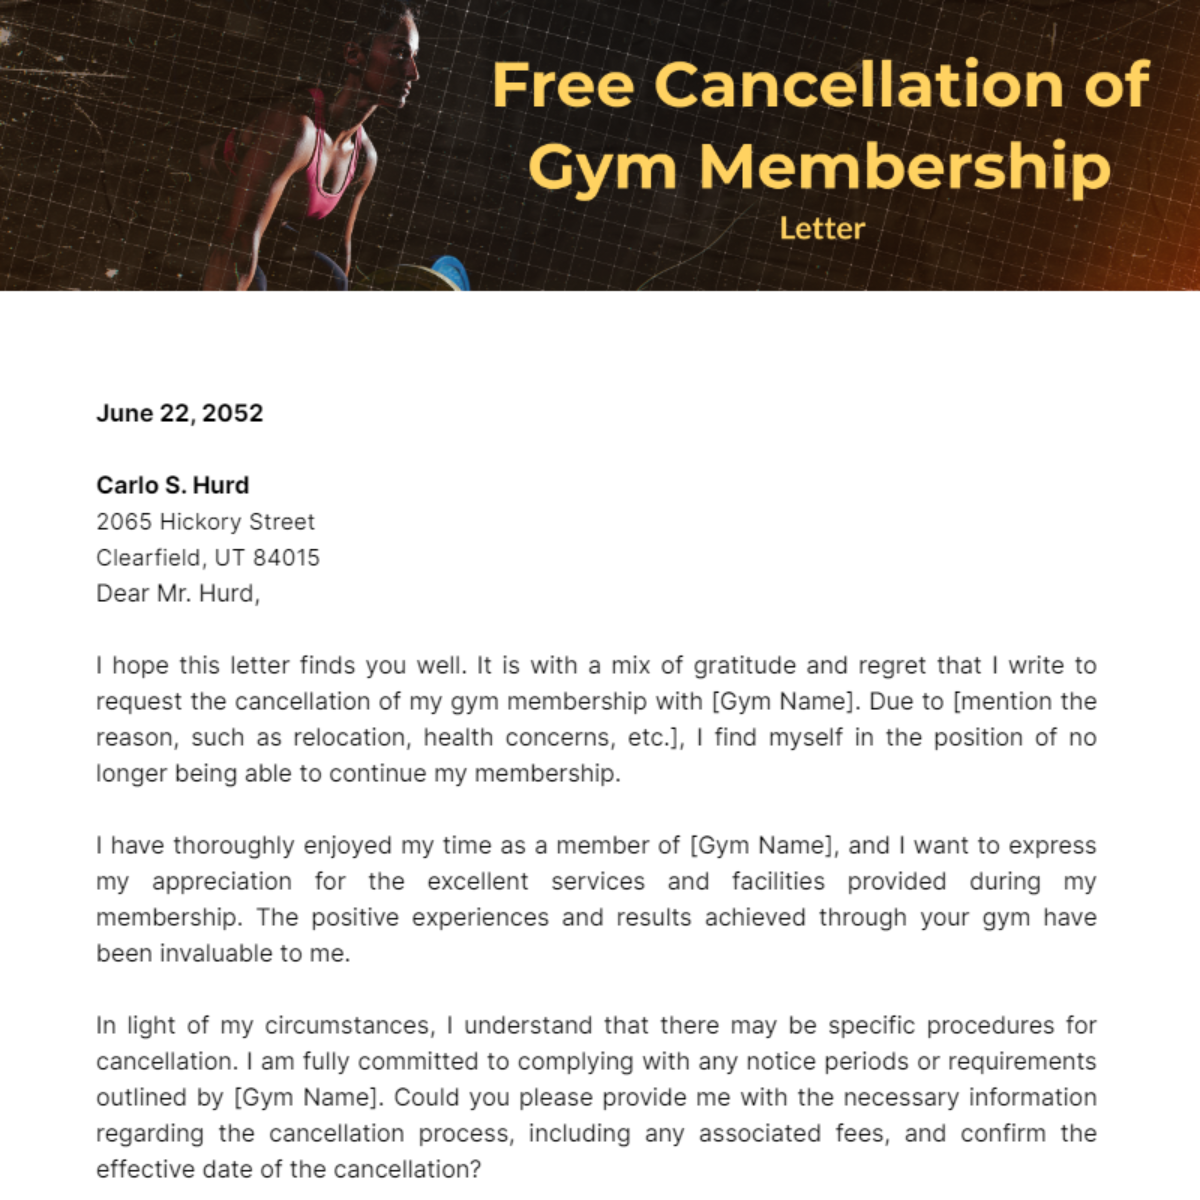 Cancellation of Gym Membership Letter Template